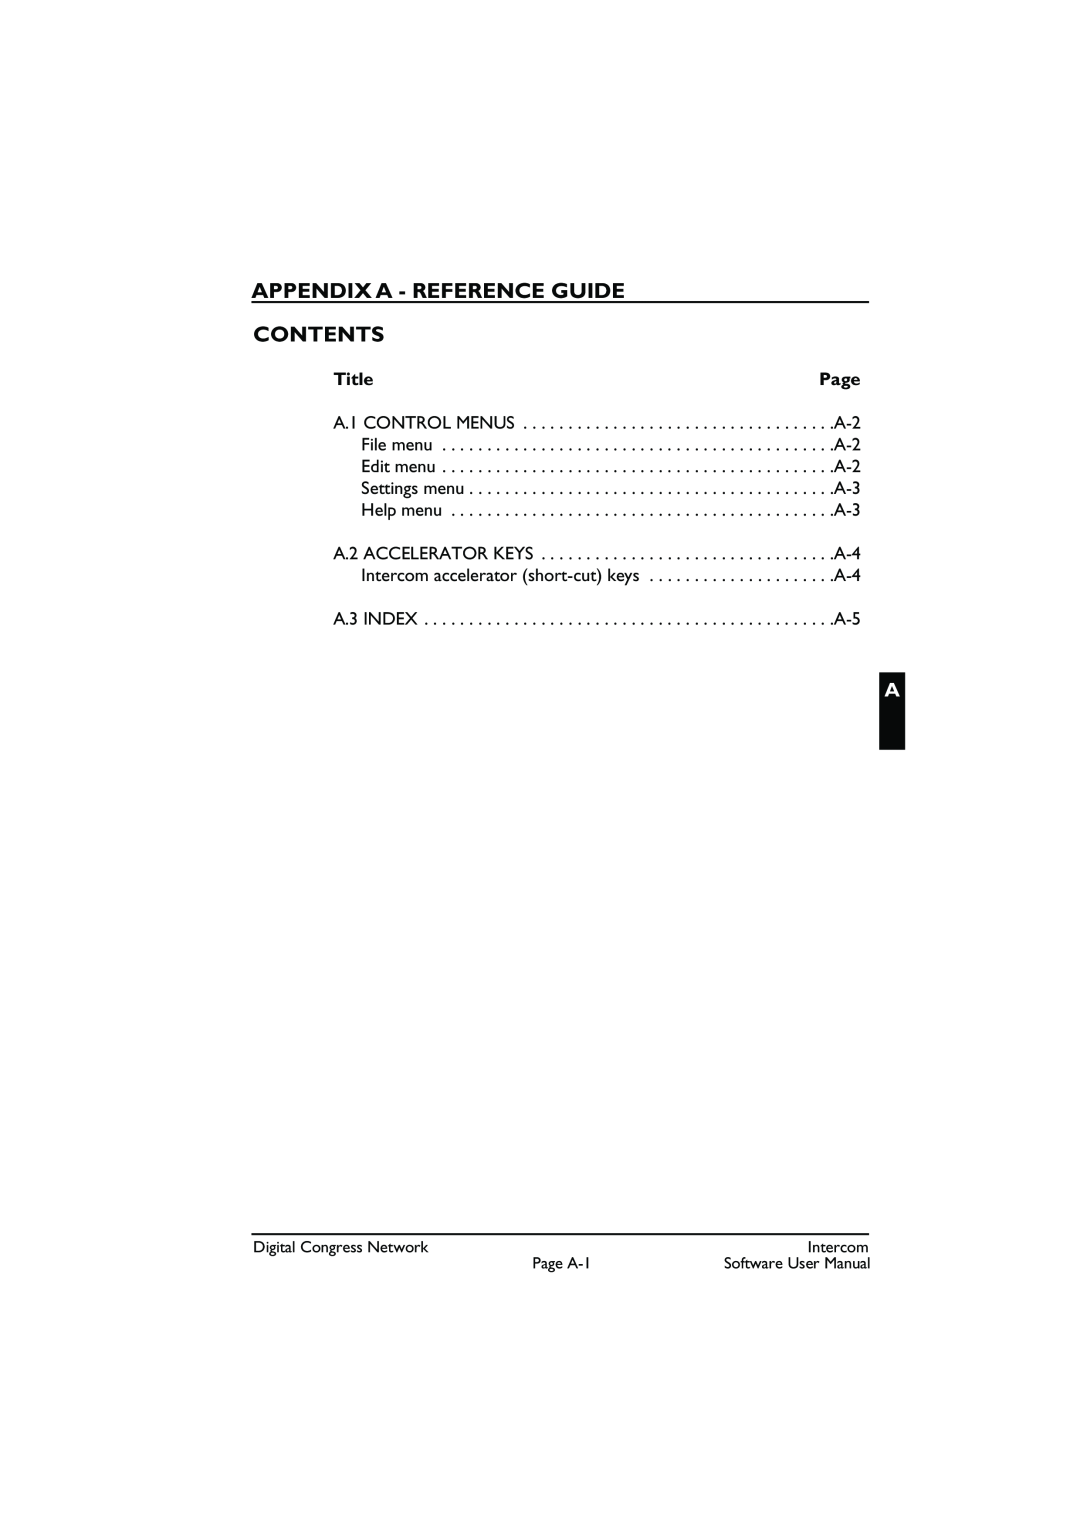 Bosch Appliances LBB 3573 user manual Appendix A - Reference Guide Contents, Title, Page 